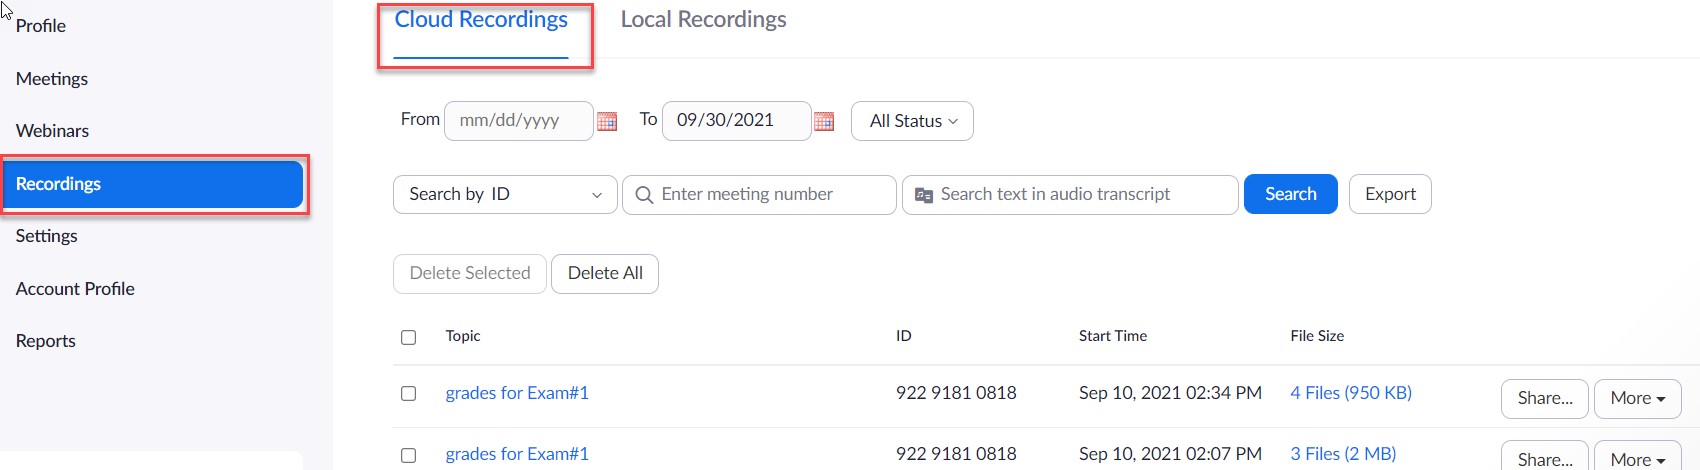 Recording tab, Cloud Recordings, list of meetings up to Sept.30, 2021, two visible records are Grades for Exam#1